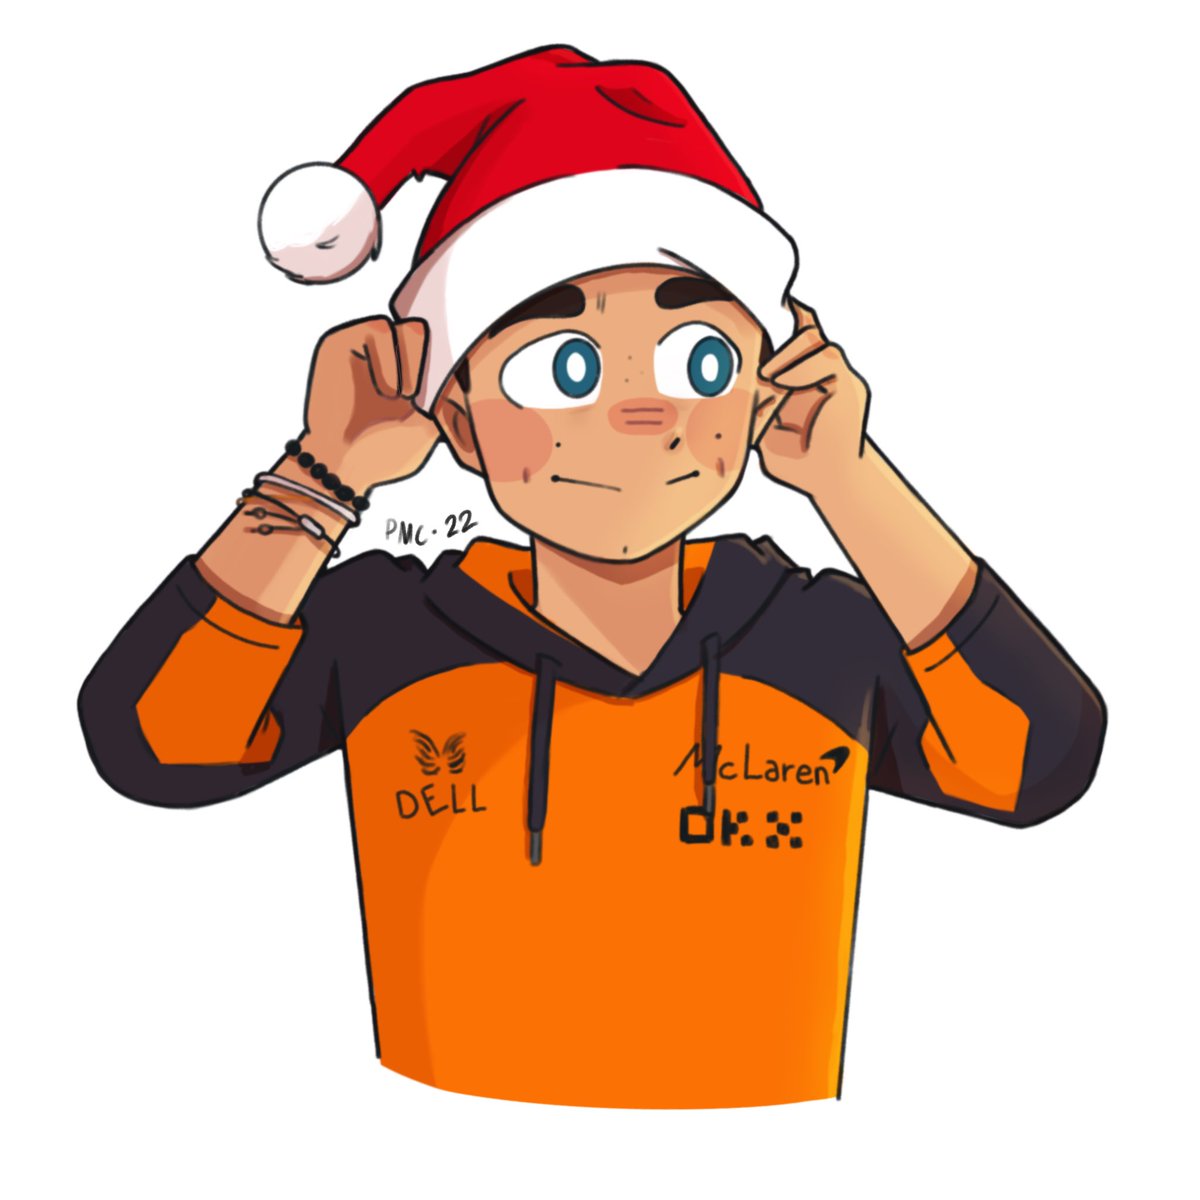 Merry Christmas to those who celebrate! 🎄🧡 And Happy Sunday to those who don’t ☺️

Enjoy a little Christmassy Lando doodle 🤗🎅🏼 #McLarenCreators #FansLikeNoOther